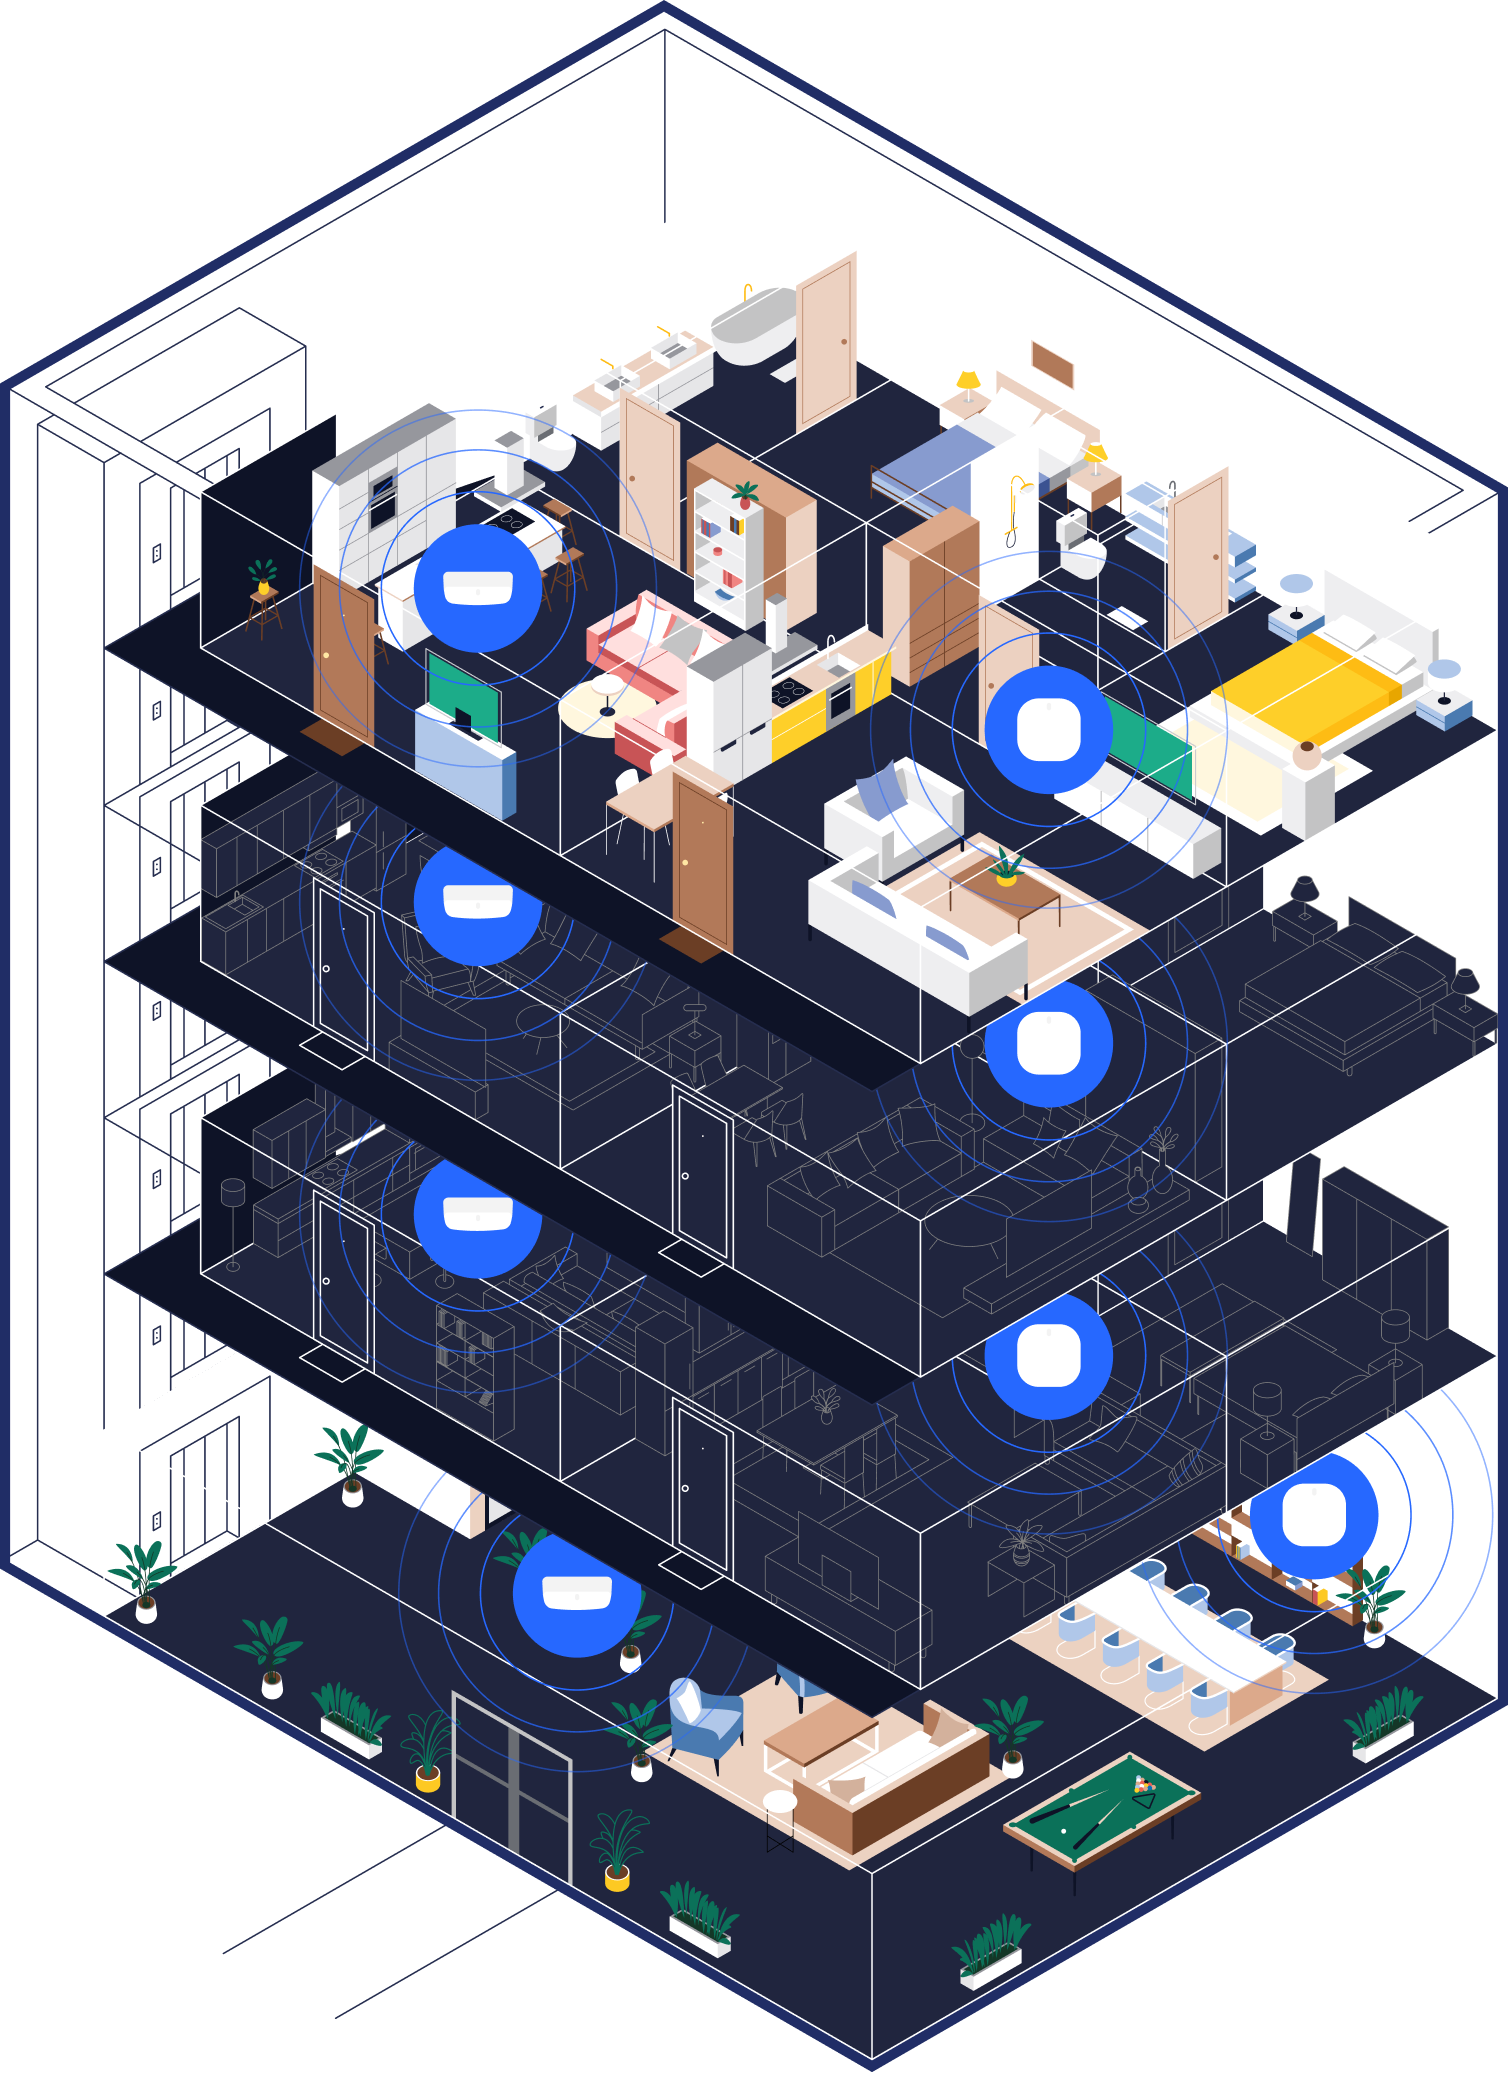 Illustration of people collaborating in an office space